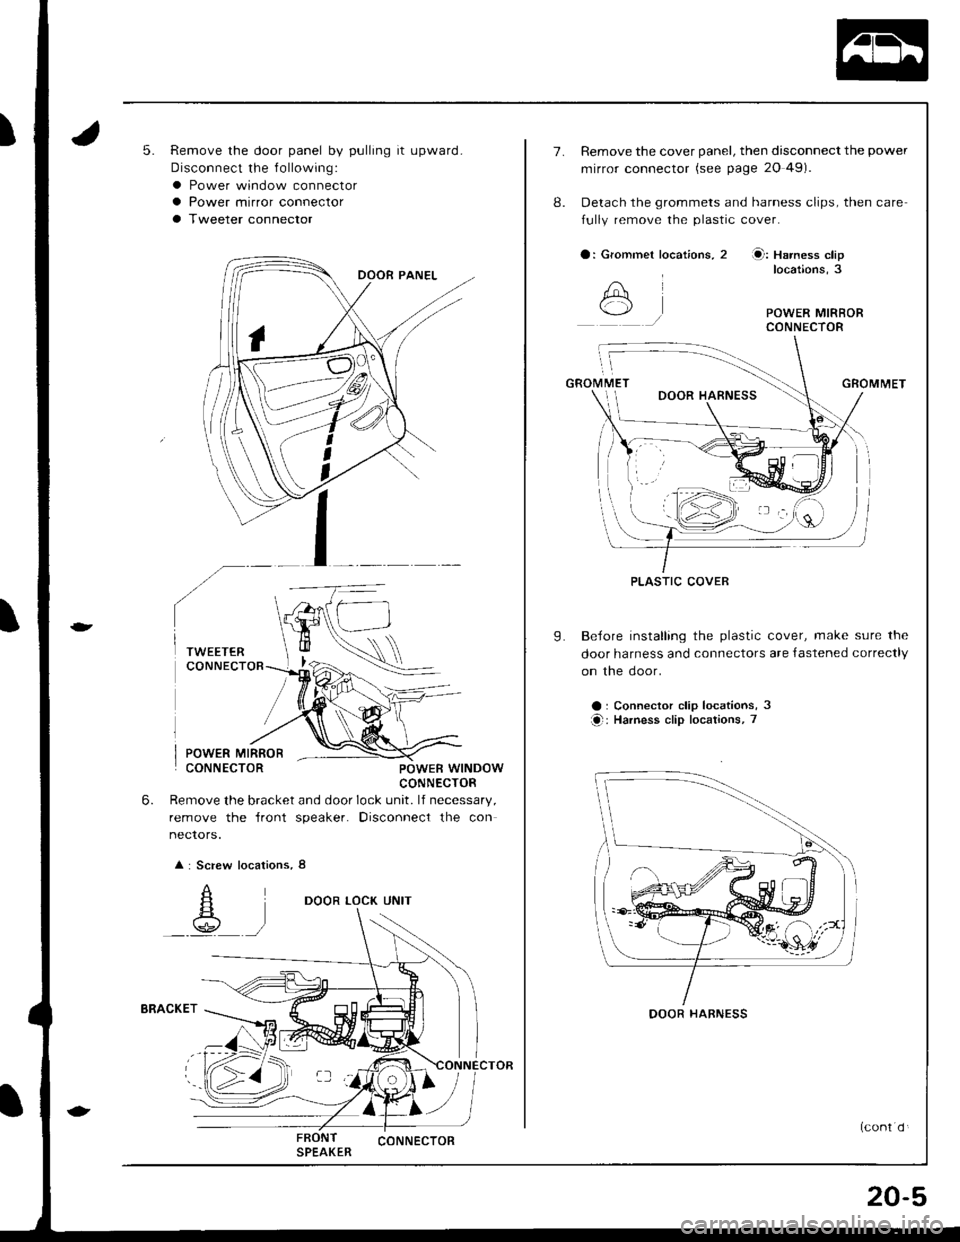 ACURA INTEGRA 1998  Service Repair Manual 5.Remove the door panel by pulling it upward.
Disconnect the f ollowing:
a Power window connectora Power mirror connector
a Tweeter connector
POWER MIRRORCONNECTORPOWEB WINDOWCONNECTOR
Remove the brac